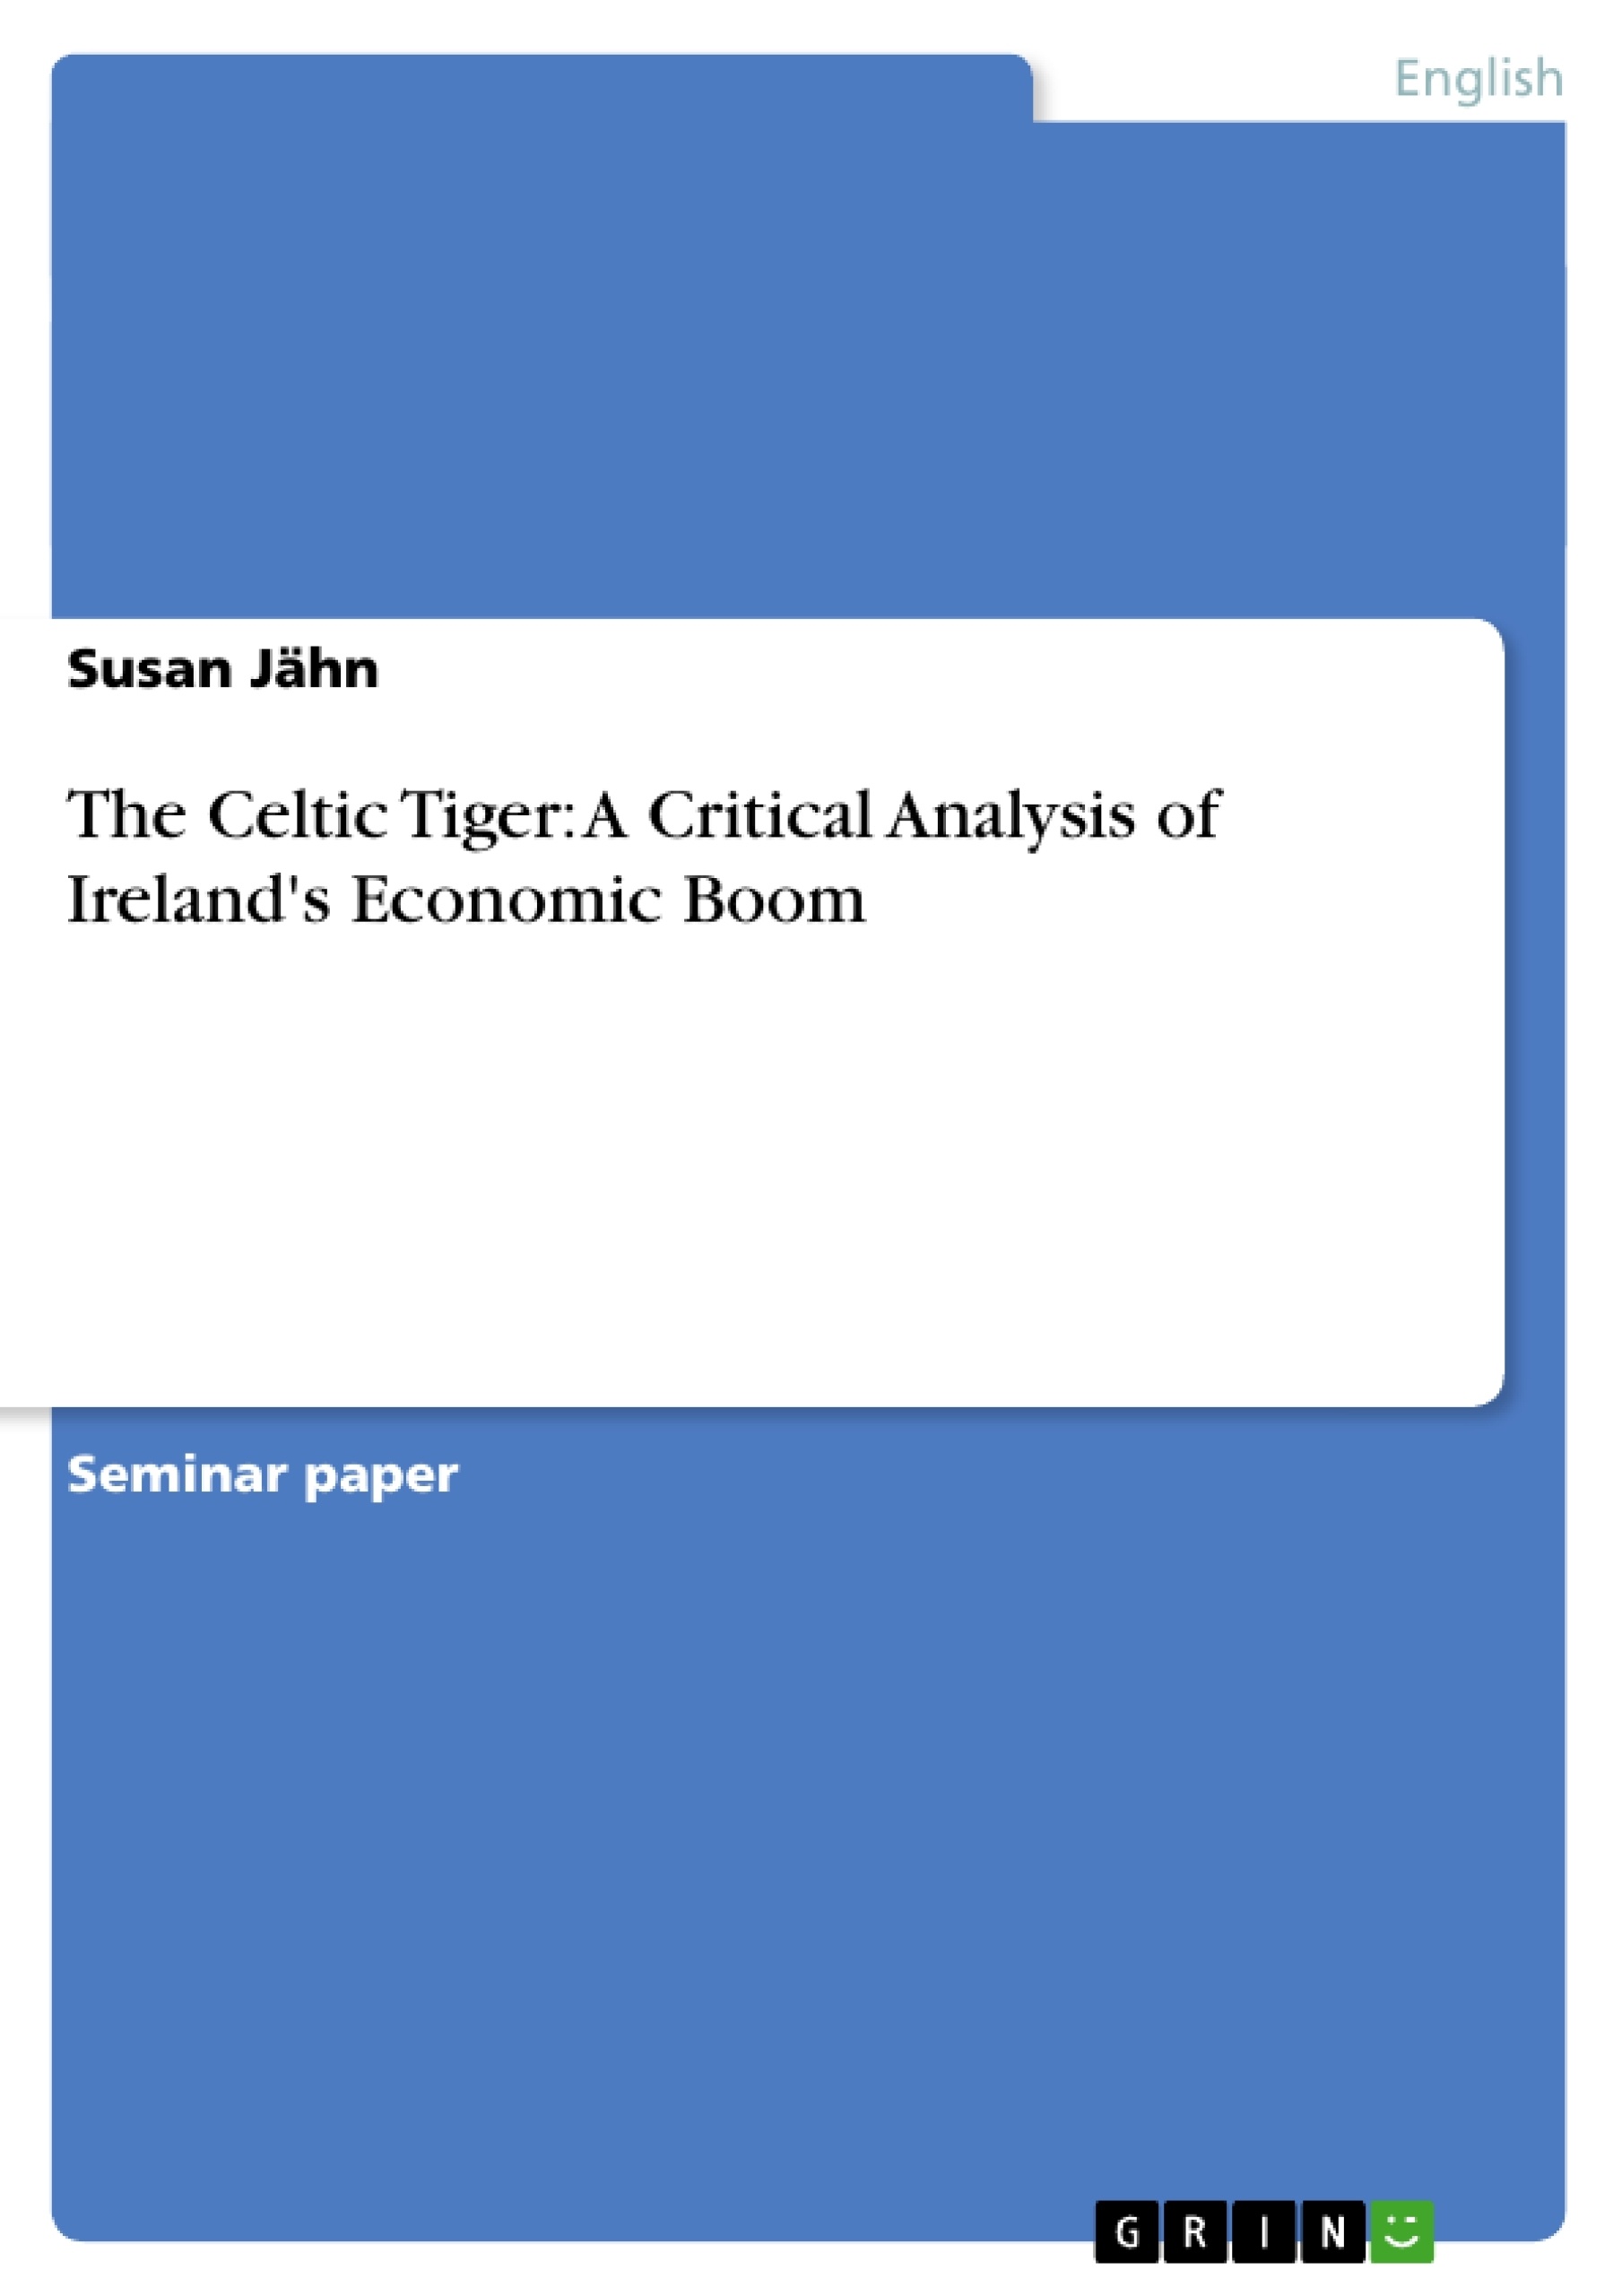 Title: The Celtic Tiger: A Critical Analysis of Ireland's Economic Boom